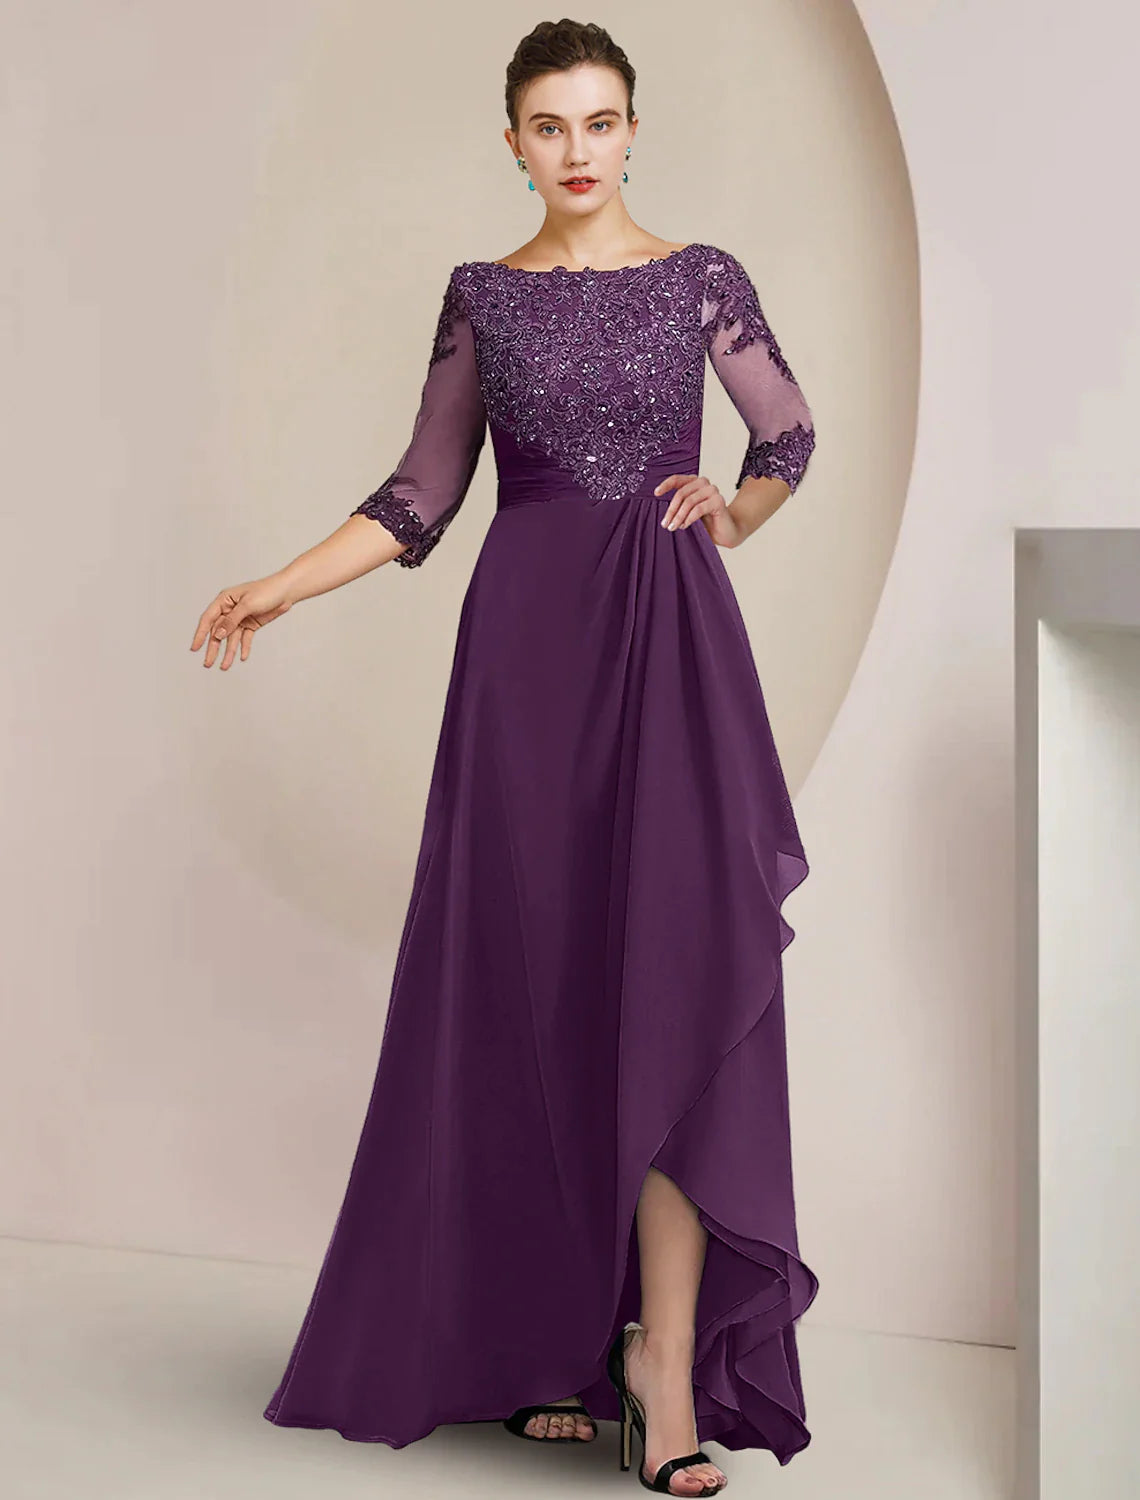 A-Line Mother of the Bride Dress Formal Wedding Guest Elegant High Low Scoop Neck Asymmetrical Floor Length Chiffon Lace 3/4 Length Sleeve with Beading Sequin Appliques